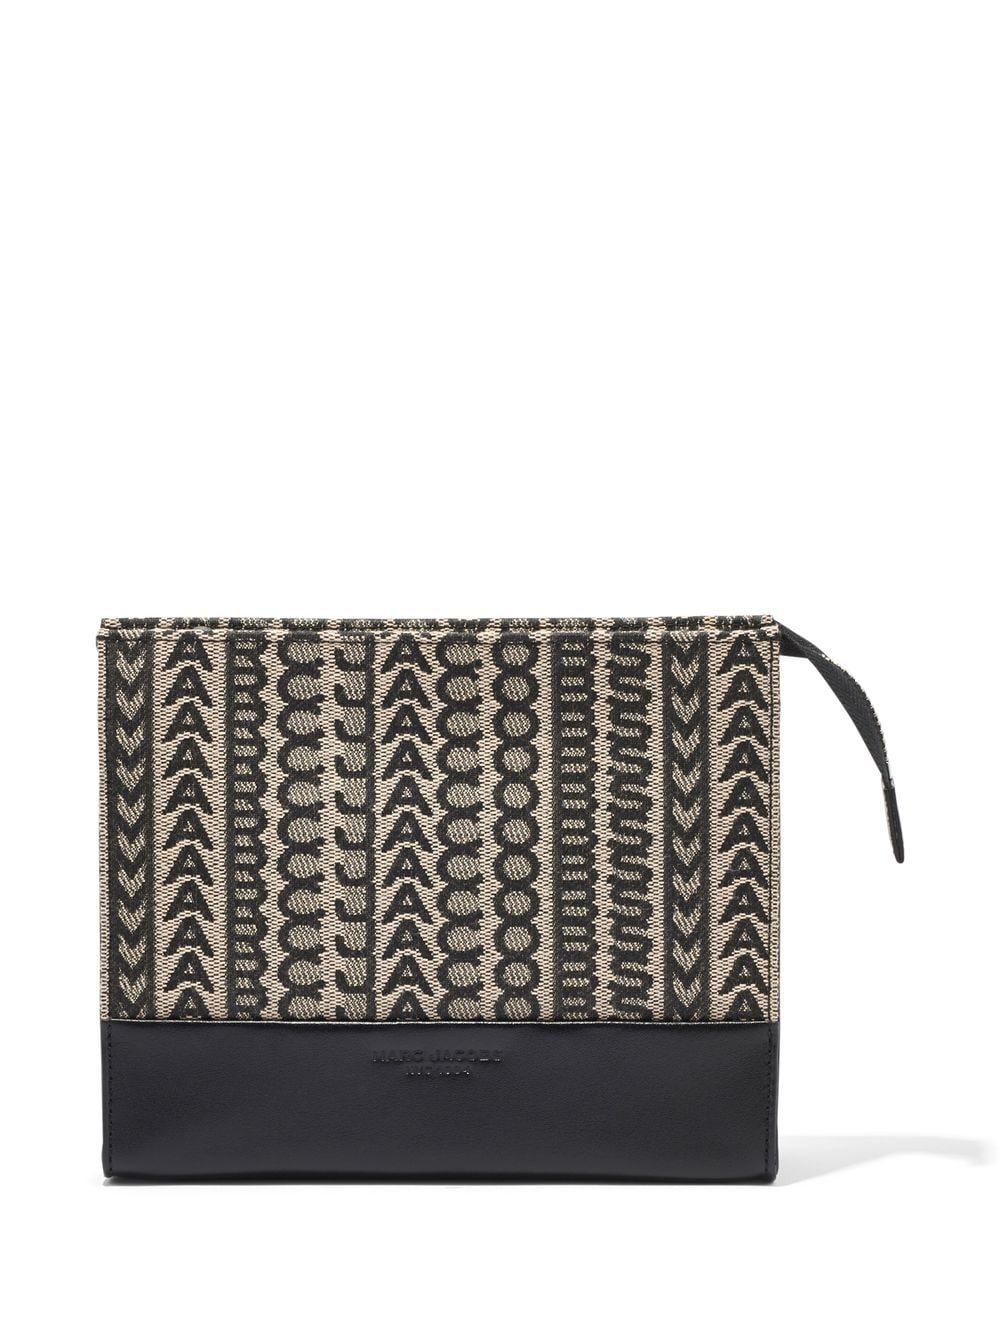 Marc Jacobs The Monogram Travel Pouch in Black | Lyst